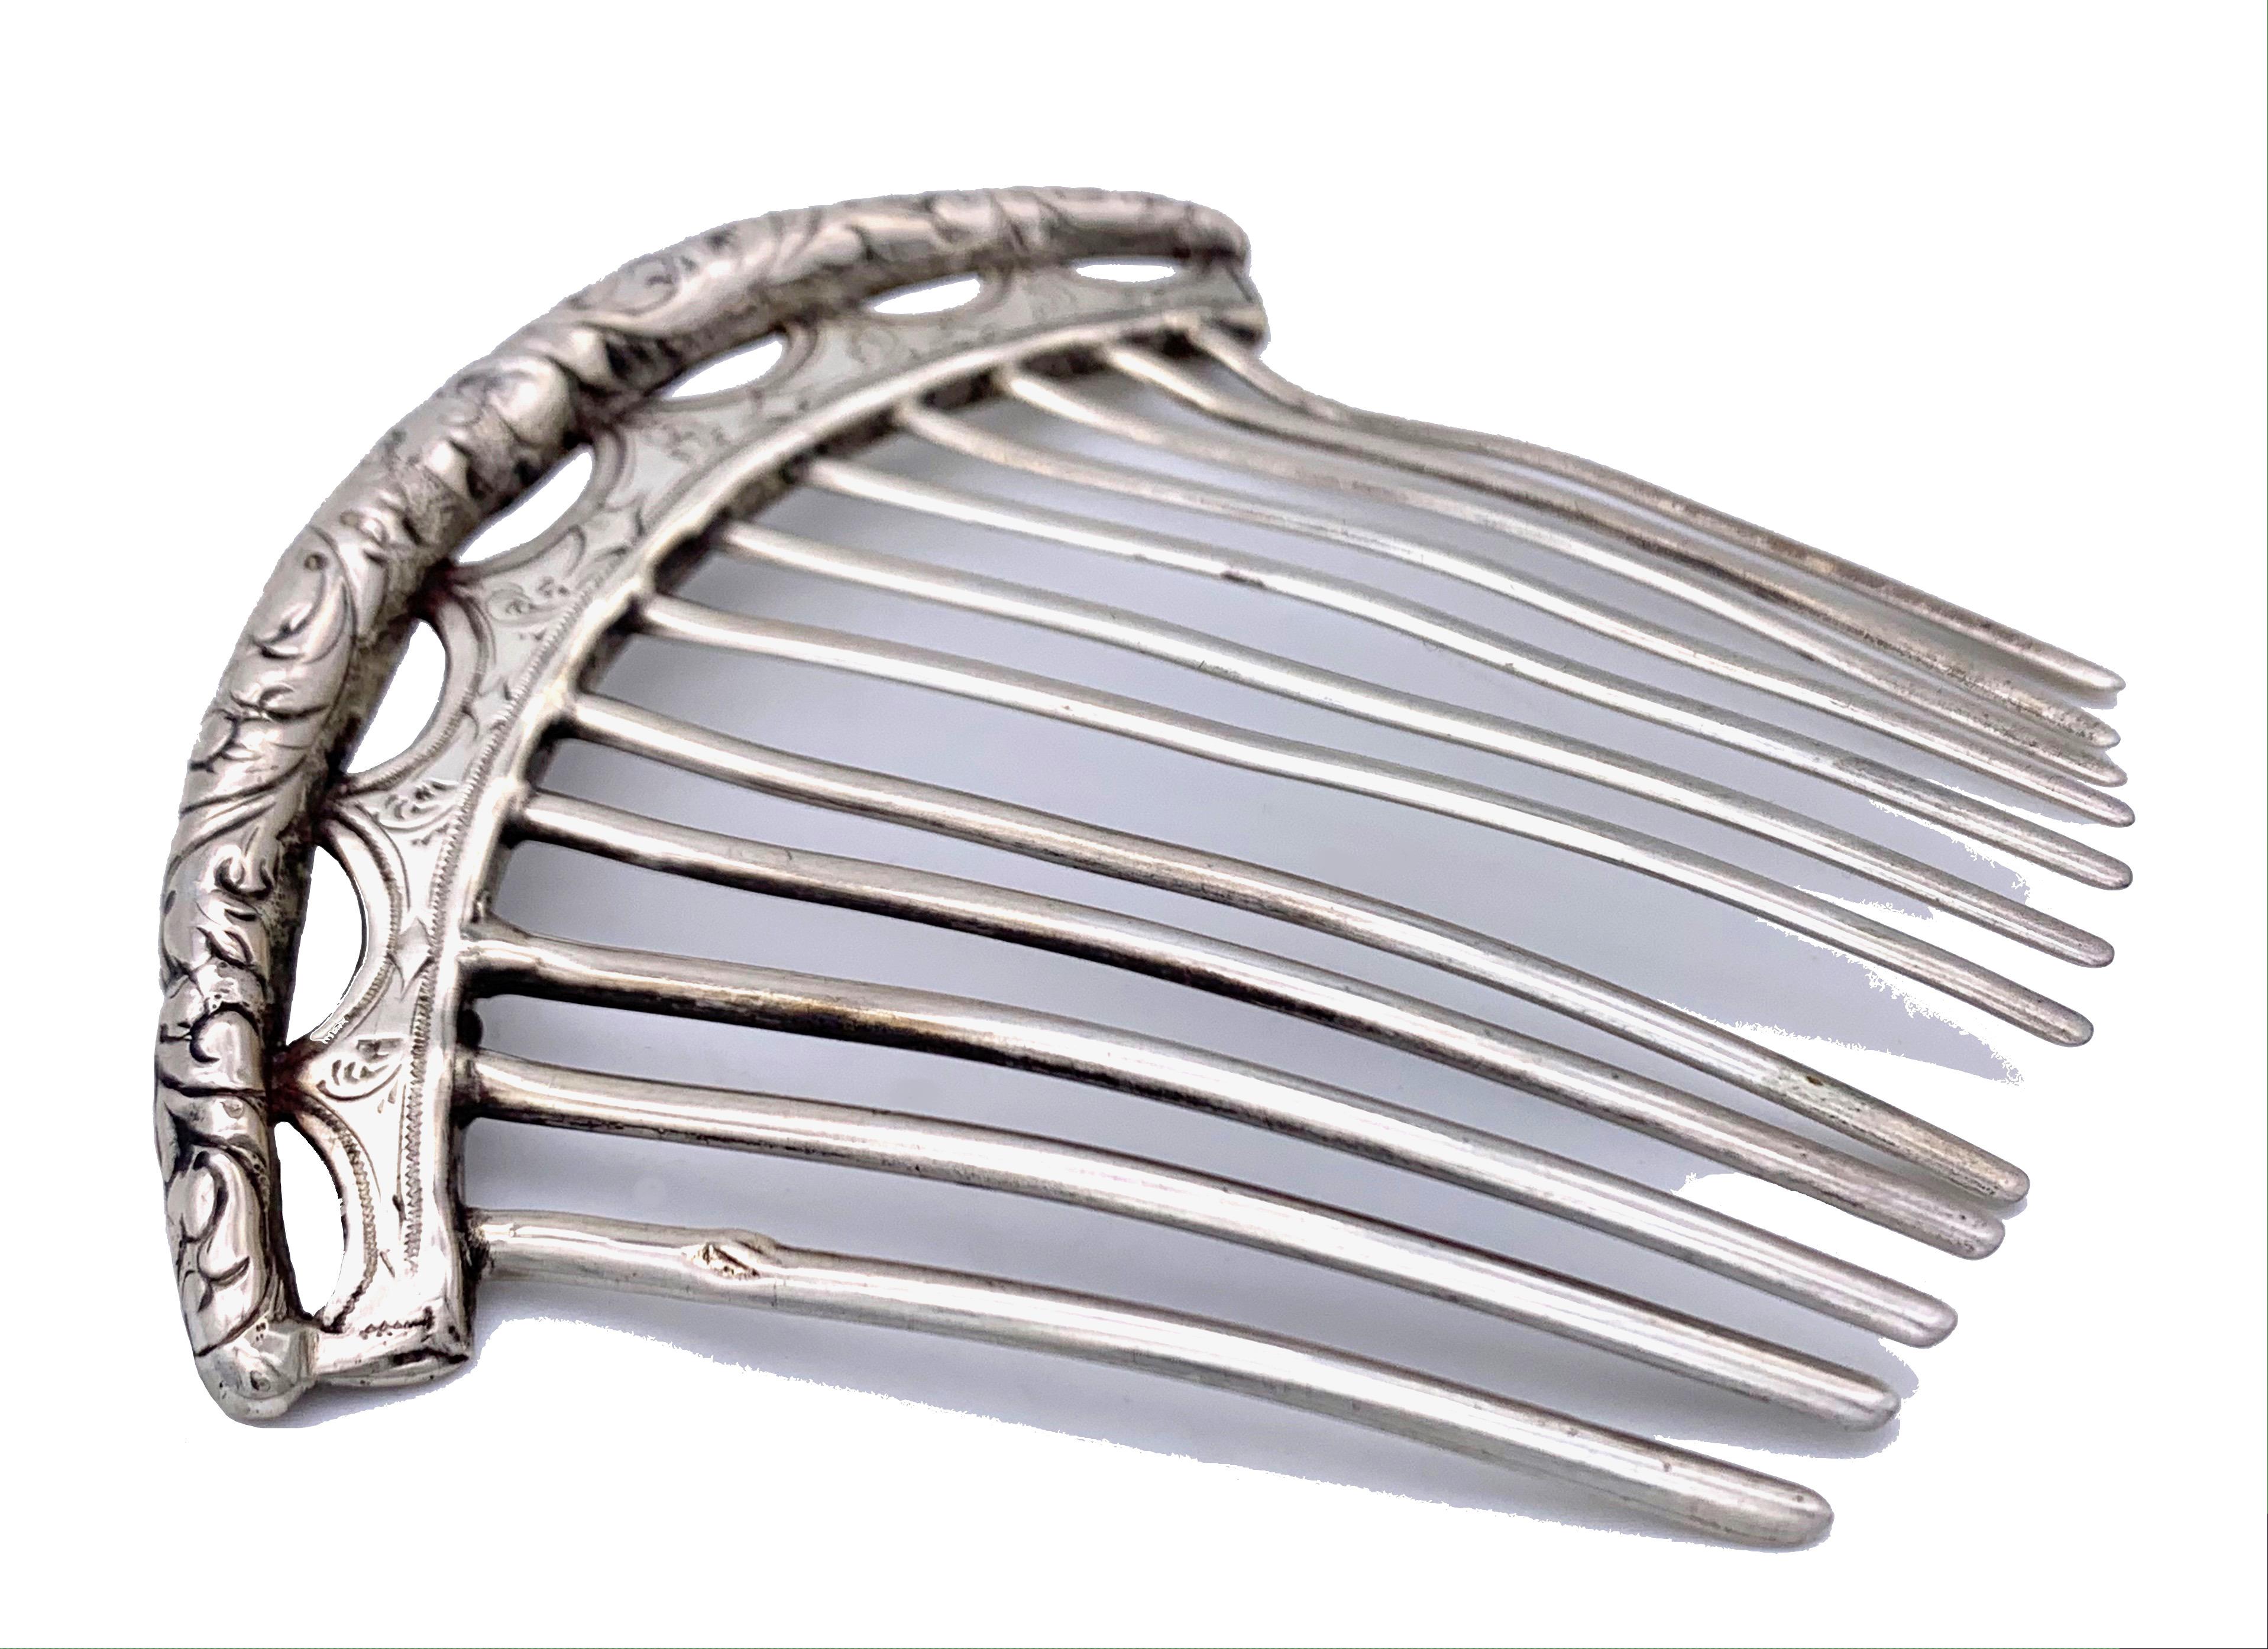 Antique Silver Hair Comb - 4 For Sale on 1stDibs